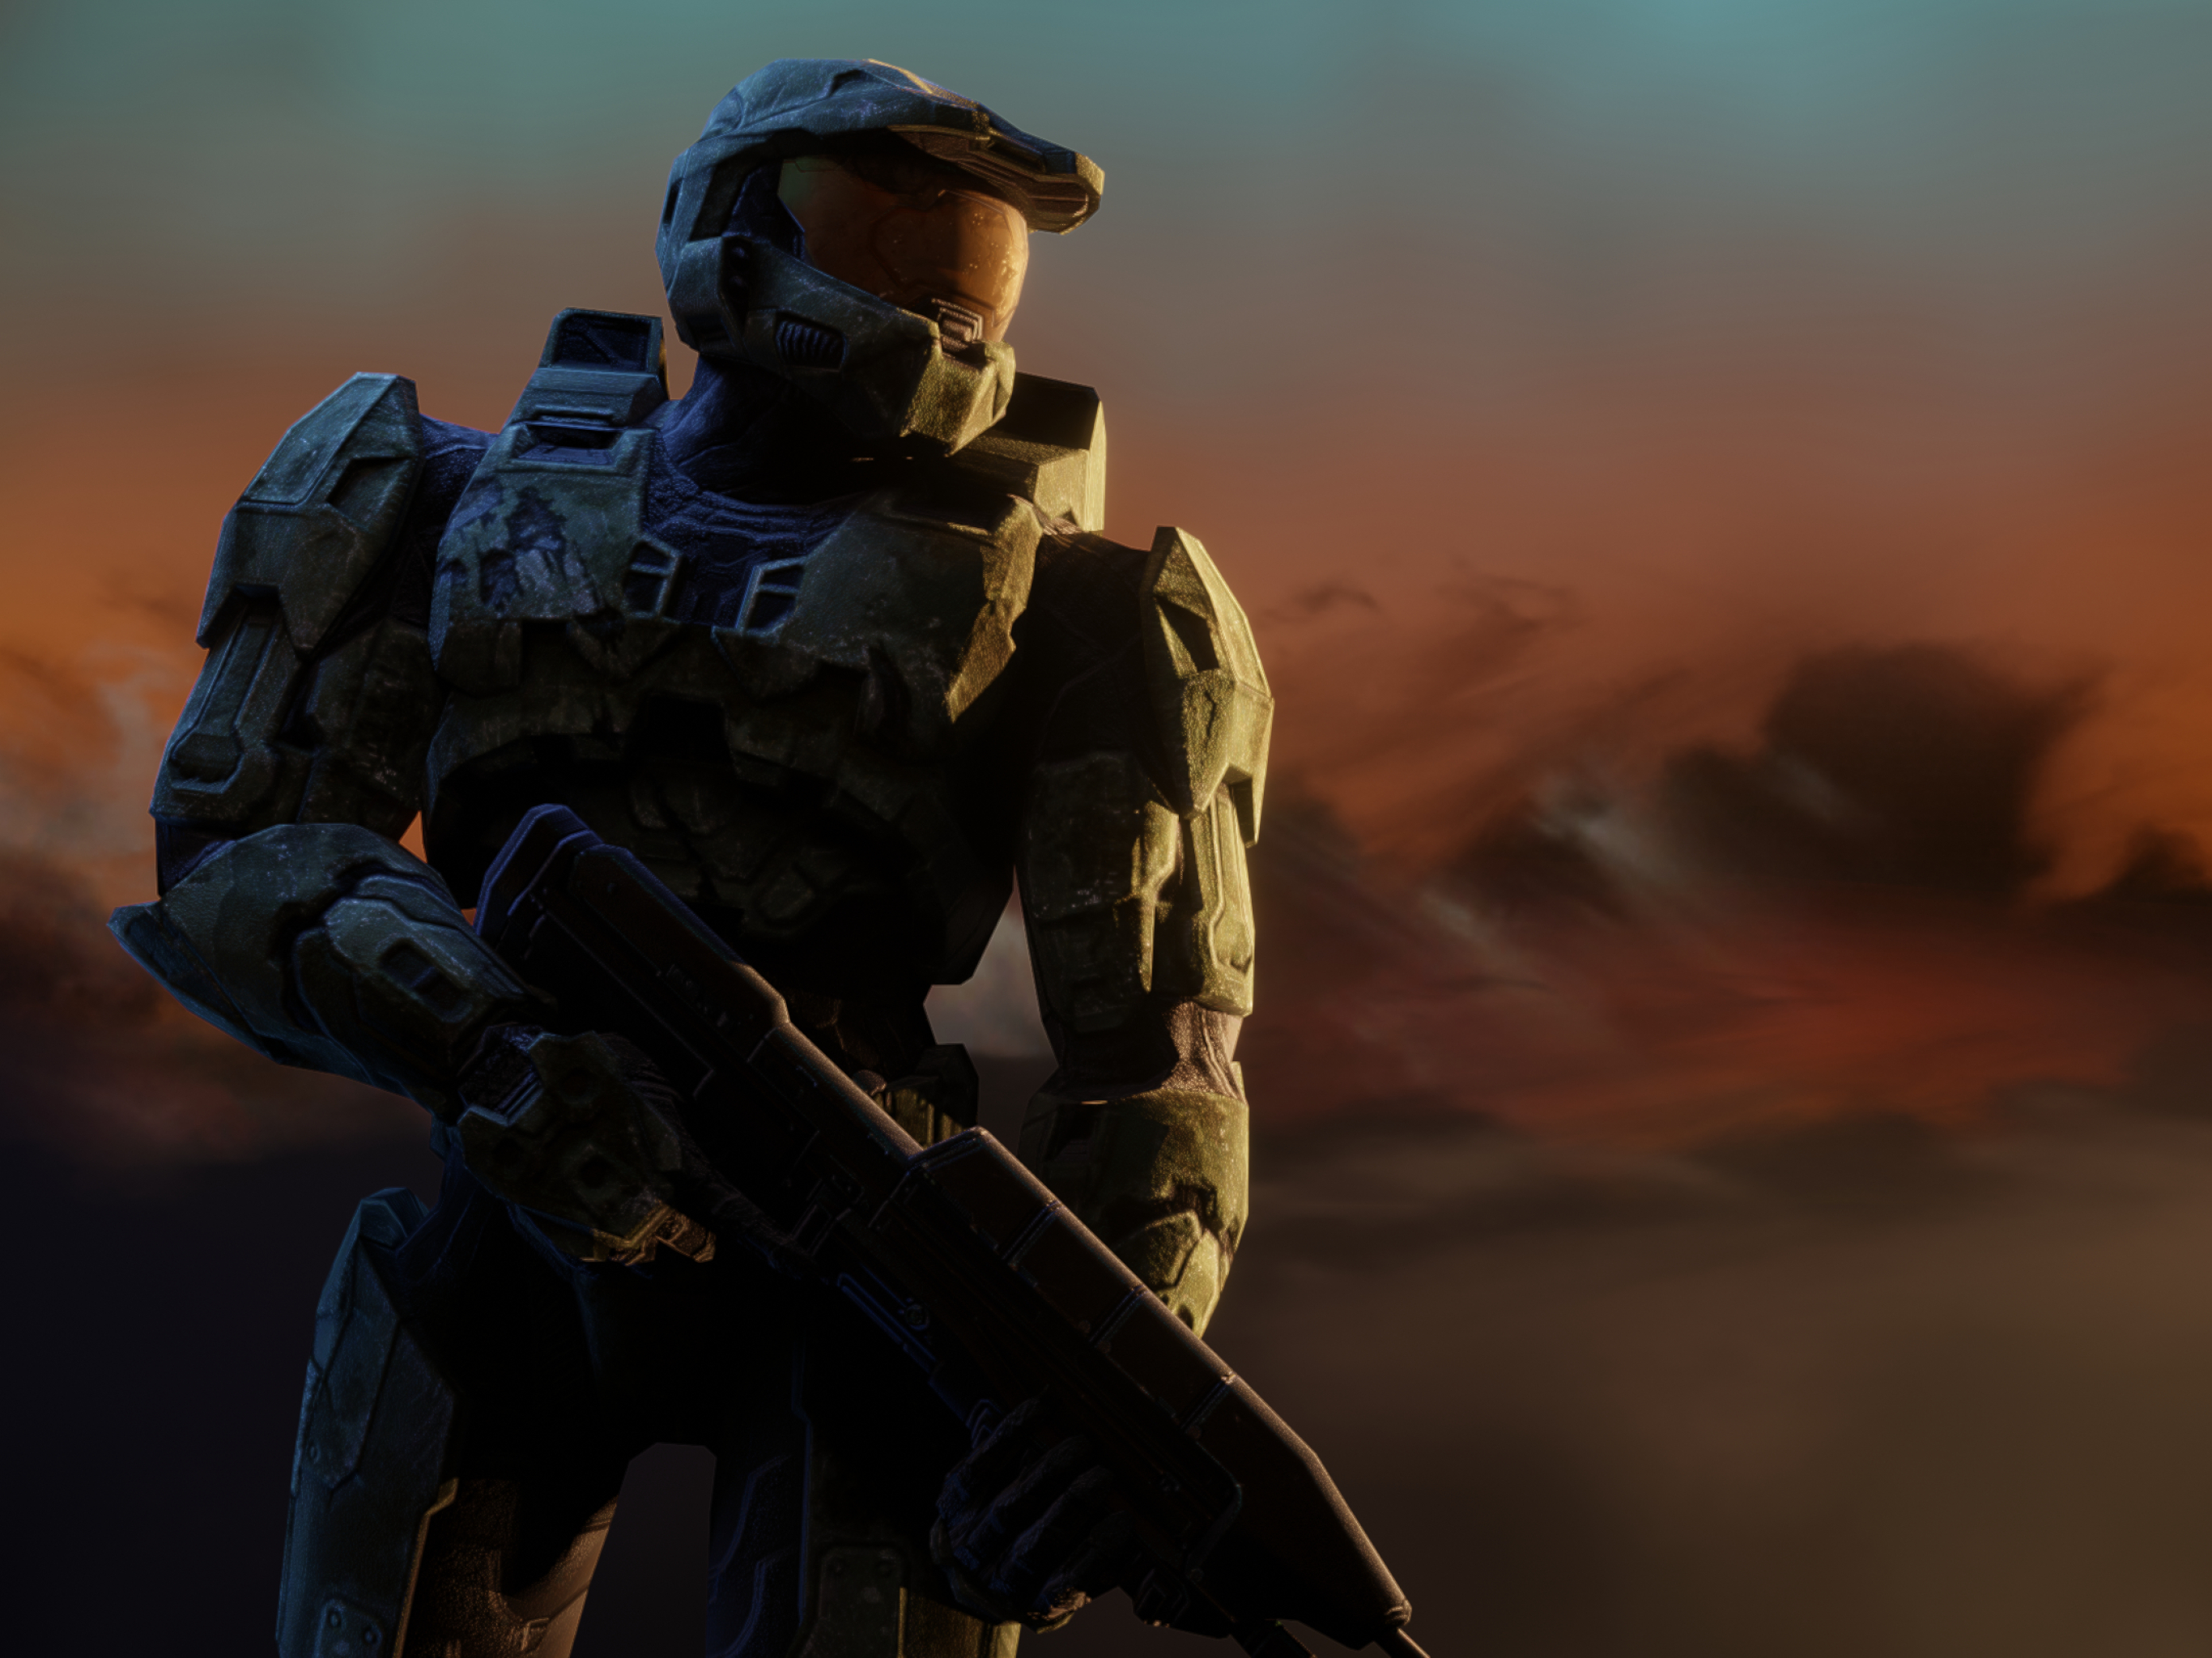 Halo 3 5K 2732x2048 Resolution Wallpaper, HD Games 4K Wallpapers, Images, P...